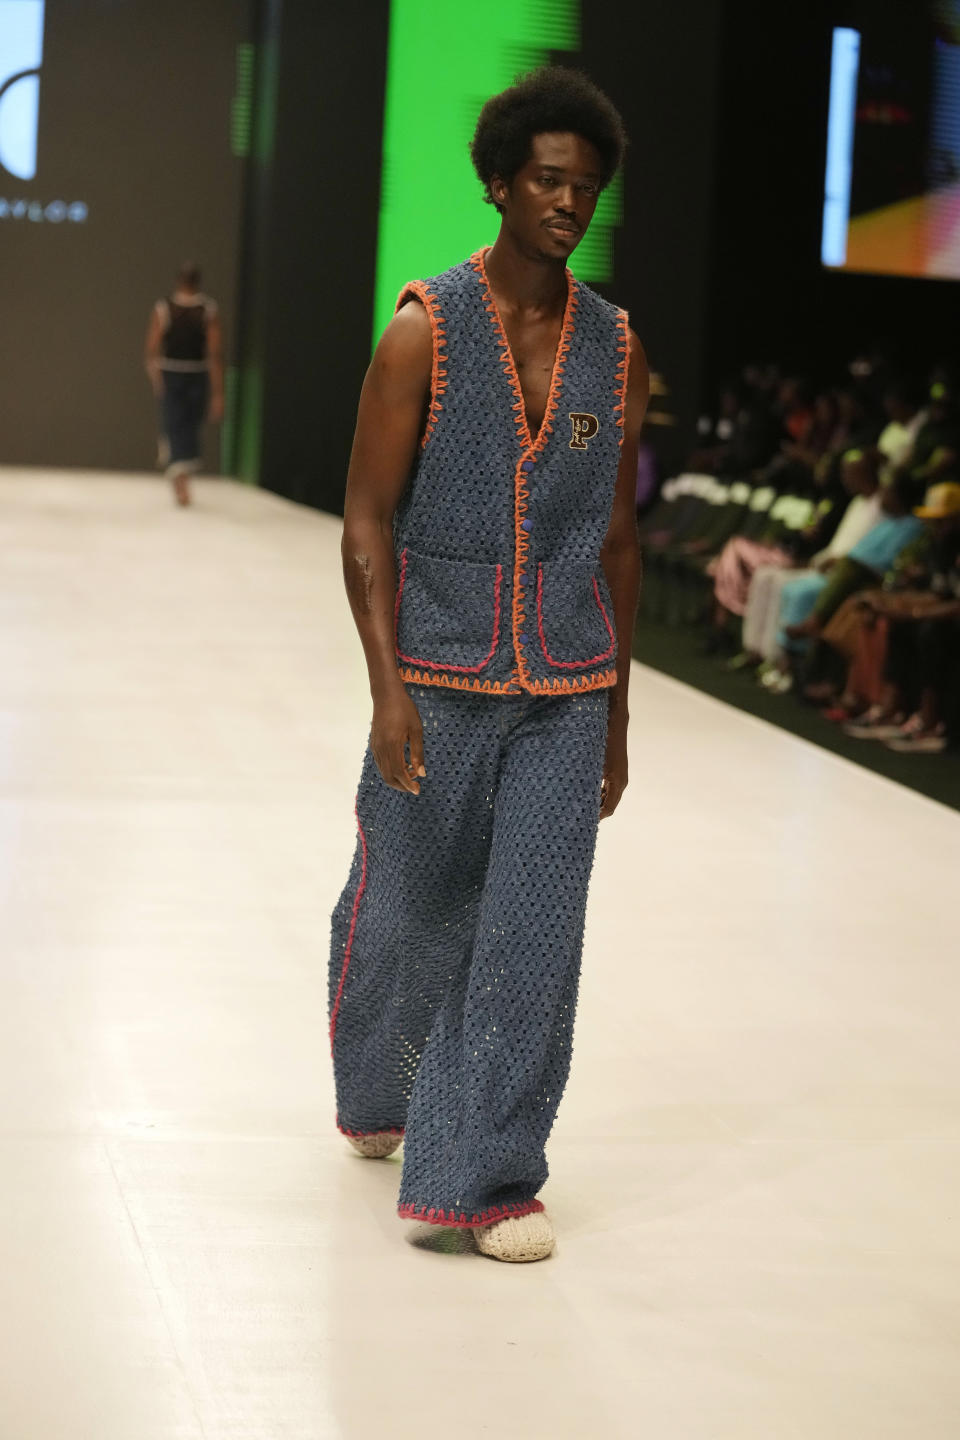 A model wears a creation by Pettre Tylor during the Lagos Fashion Week in Lagos, Nigeria, Thursday, Oct. 26, 2023. Africa's fashion industry is rapidly growing to meet local and international demands but a lack of adequate investment still limits its full potential, UNESCO said Thursday in its new report released at this year's Lagos Fashion Week show. (AP Photo/Sunday Alamba)